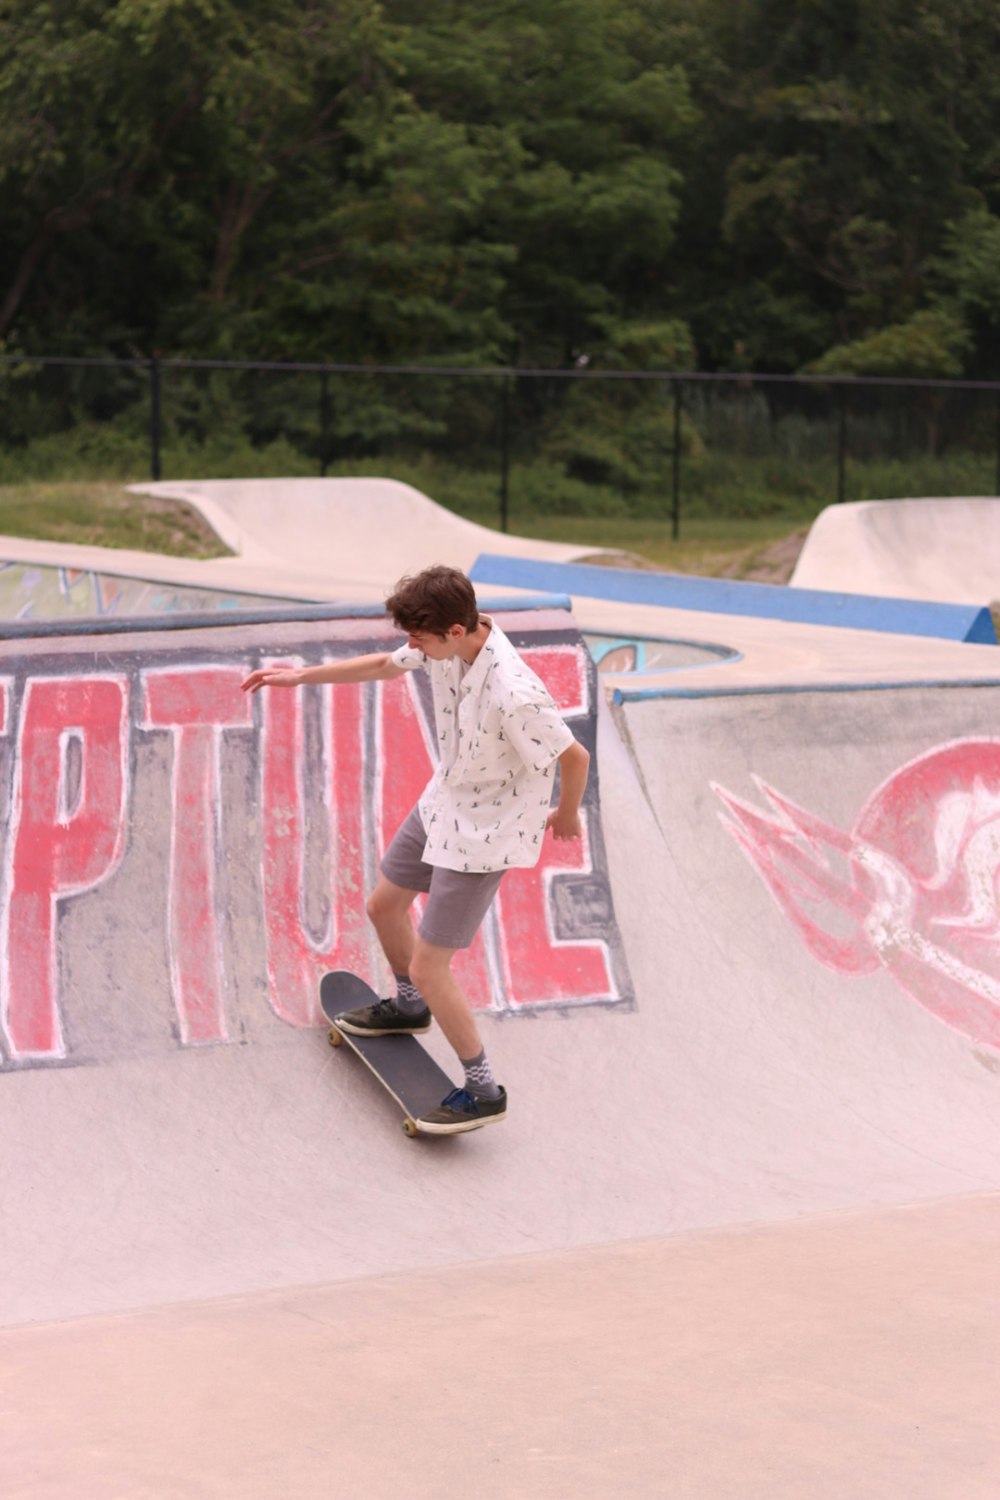 a young man riding a skateboard up the side of a ramp